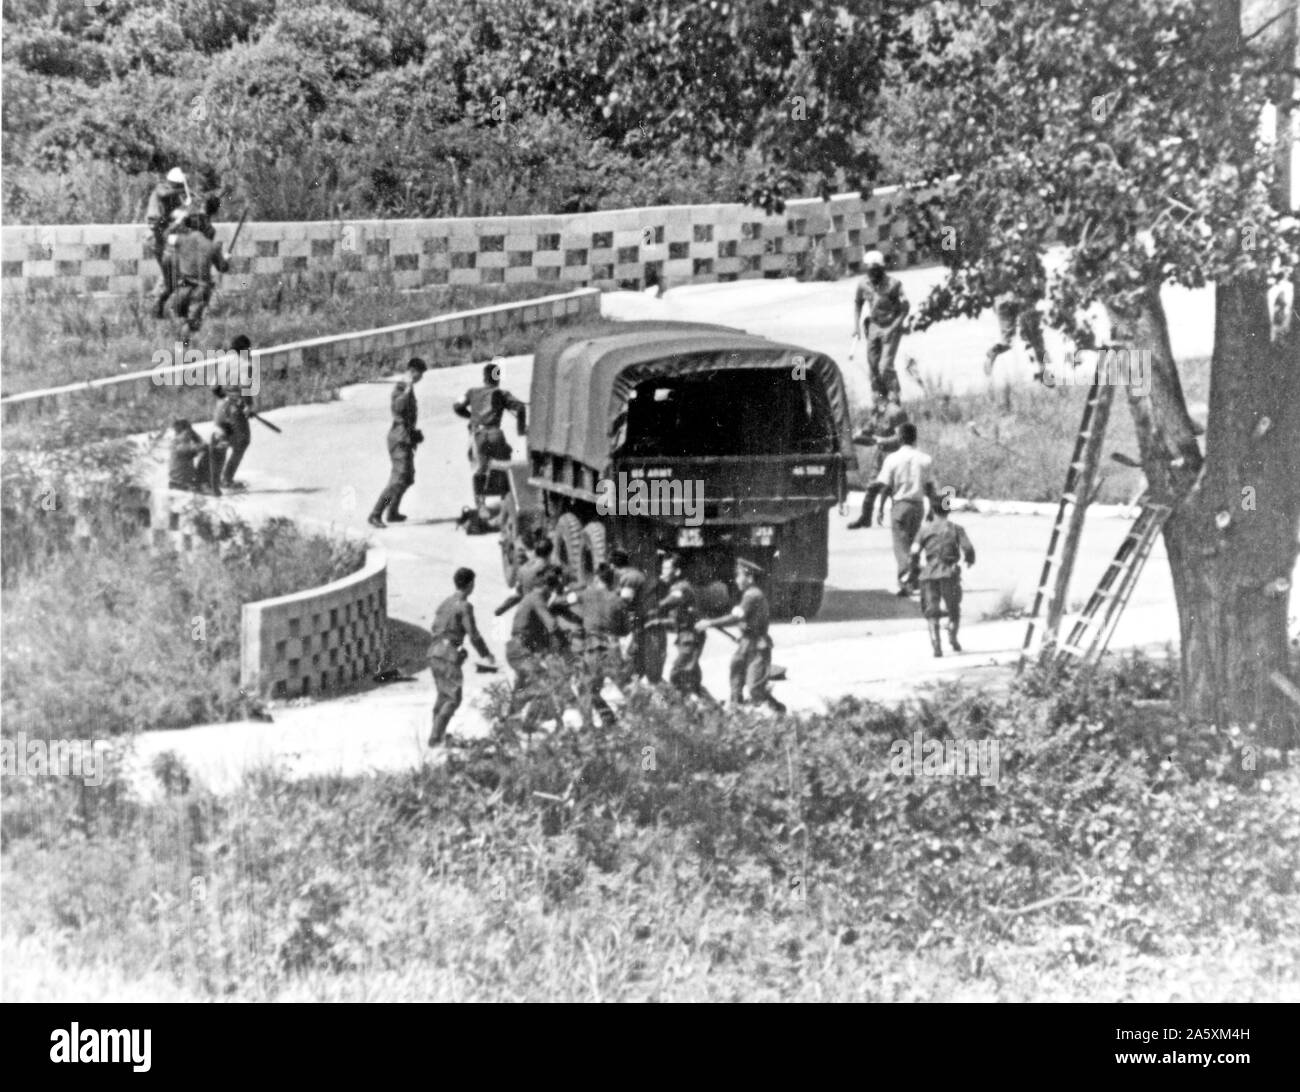 Panmunjon, Korea. Tree pruning incident 18 August 1976, at the Joint Security Area (Panmunjon) within the Demilitarized Zone separating Norht Korea and Sourh Korea. In this incident, two UNC guard officers of the US Army, Major Arthur G. Bonifas and 1st Lt. Mark T. Barrett, were hacked to death by a gang of more than thirty North Korean Security Guards. Some of the North Korean Guards got axes that the KSC workmen were using to prune the tree and used them on the UNC Guards which resulted in the deaths of the two US Army Officers Stock Photo